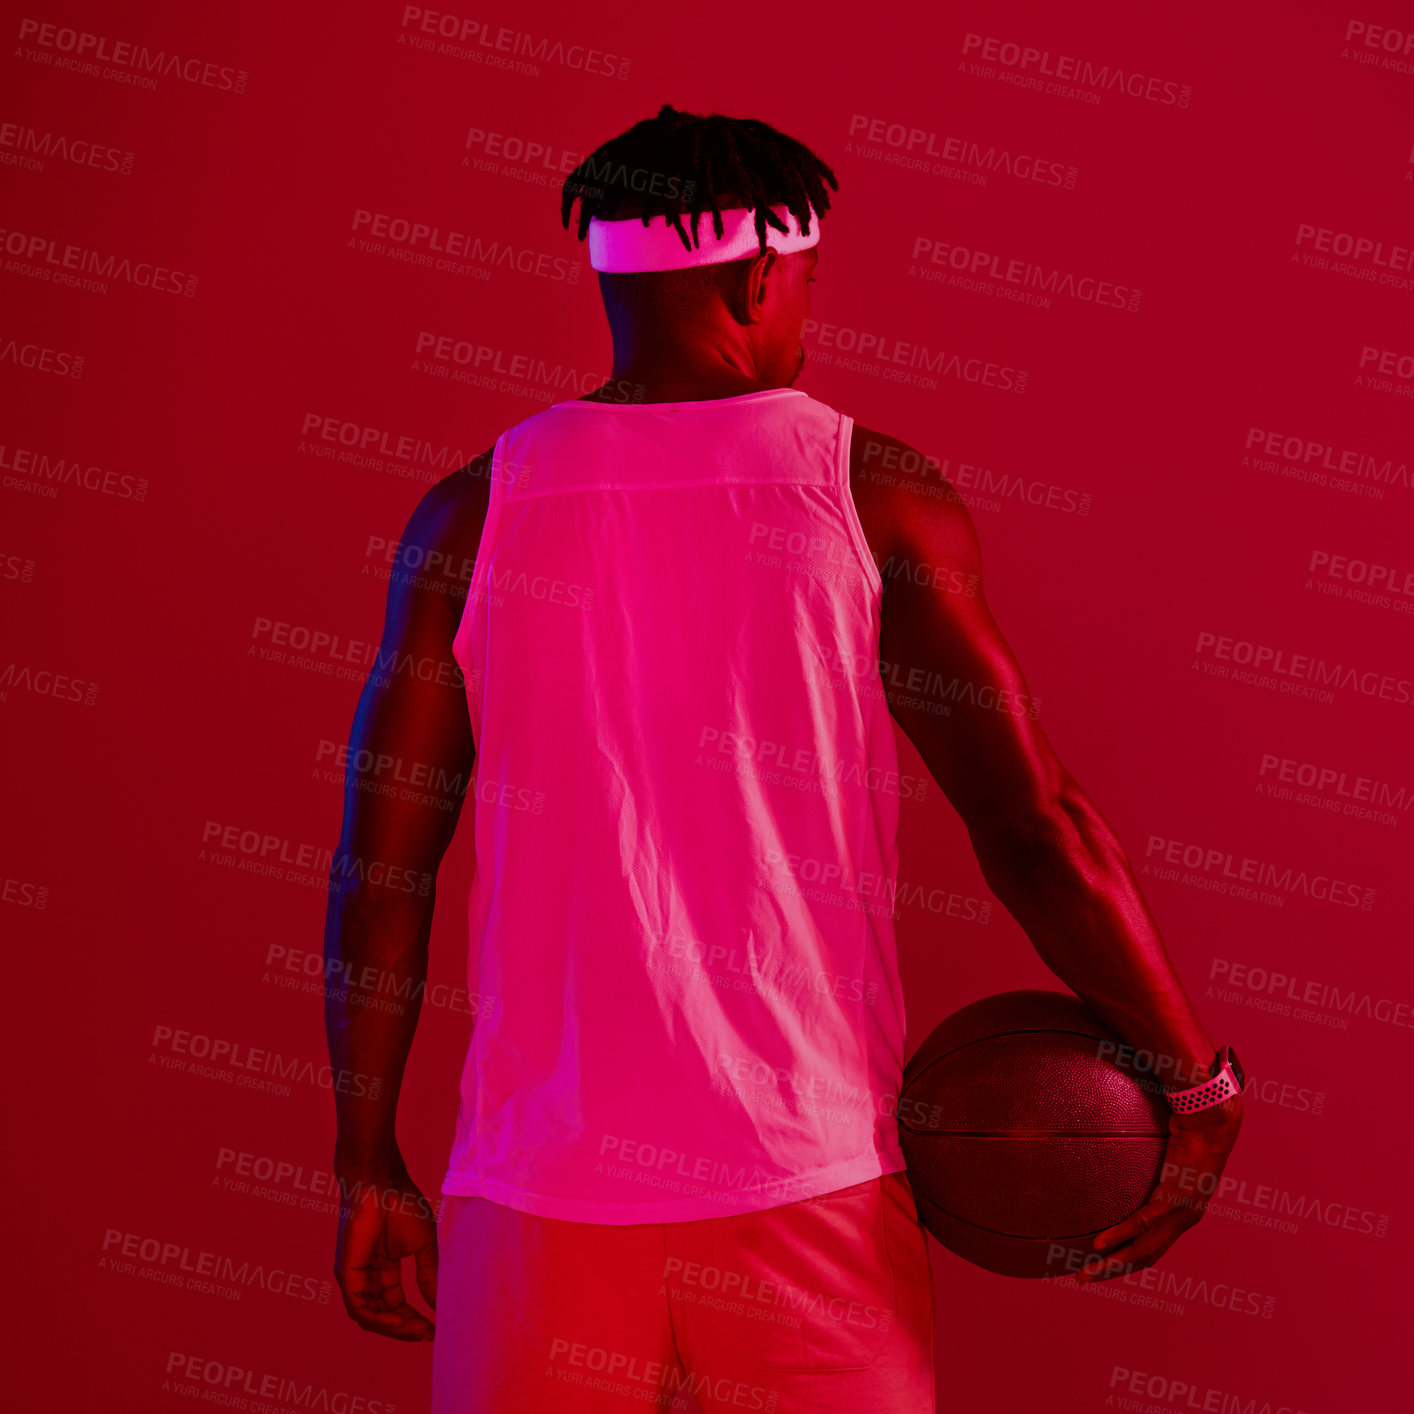 Buy stock photo Red filtered shot of a young sportsman posing with a basketball in the studio